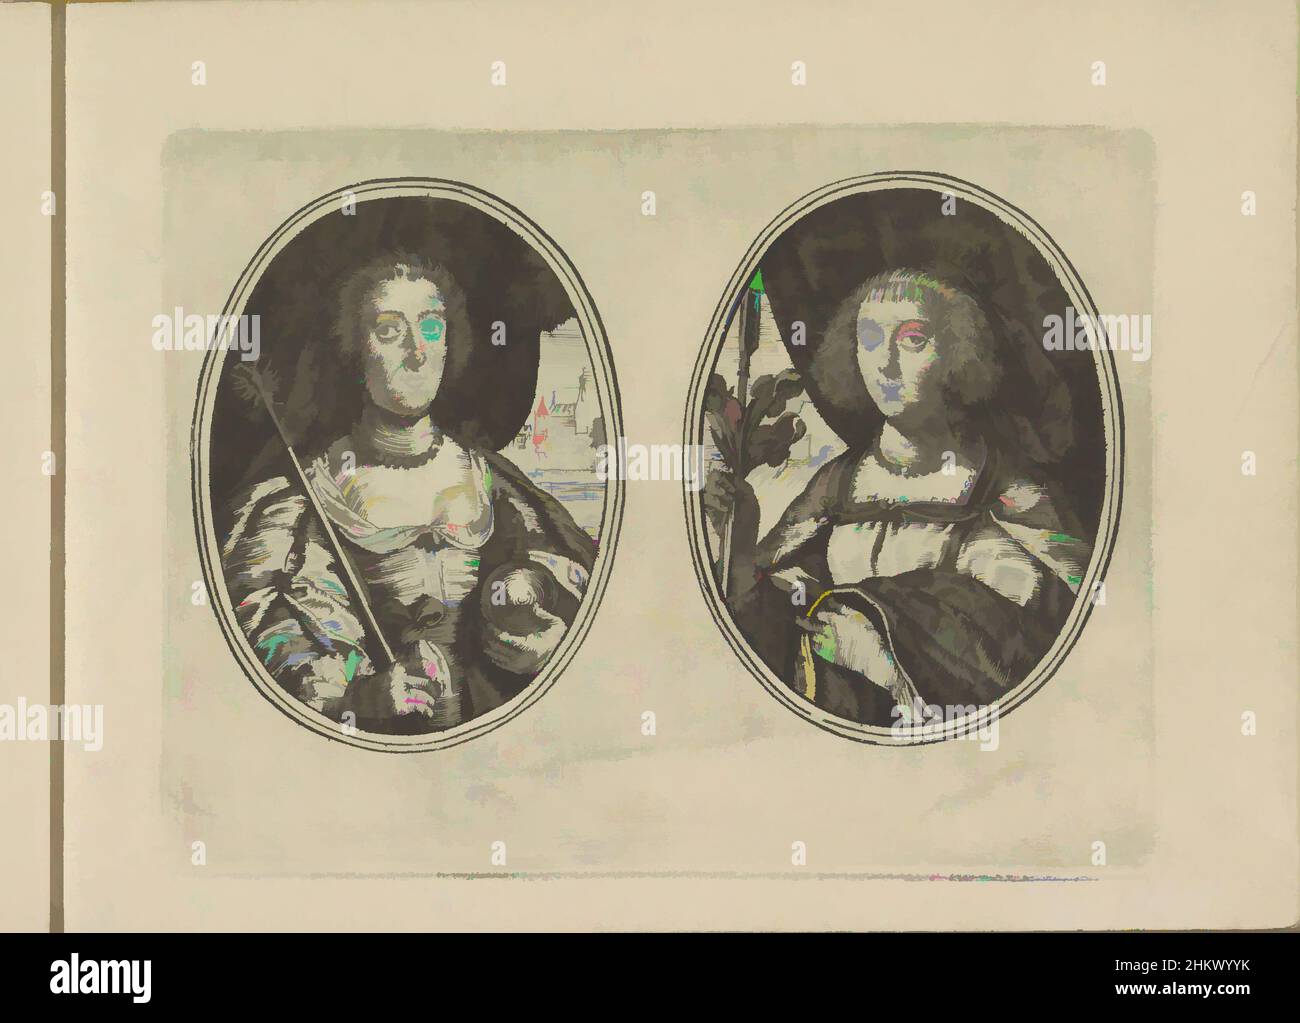 Art inspired by Portraits of Eleanor of Mantua and Anna of Austria, both as shepherdesses, Mantuana I.M.R., Galligana R.F., Les vrais pourtraits de quelques unes des plus grandes dames de la chrestiente desguisees en bergeres. (series title), Two representations on an album leaf. On the, Classic works modernized by Artotop with a splash of modernity. Shapes, color and value, eye-catching visual impact on art. Emotions through freedom of artworks in a contemporary way. A timeless message pursuing a wildly creative new direction. Artists turning to the digital medium and creating the Artotop NFT Stock Photo